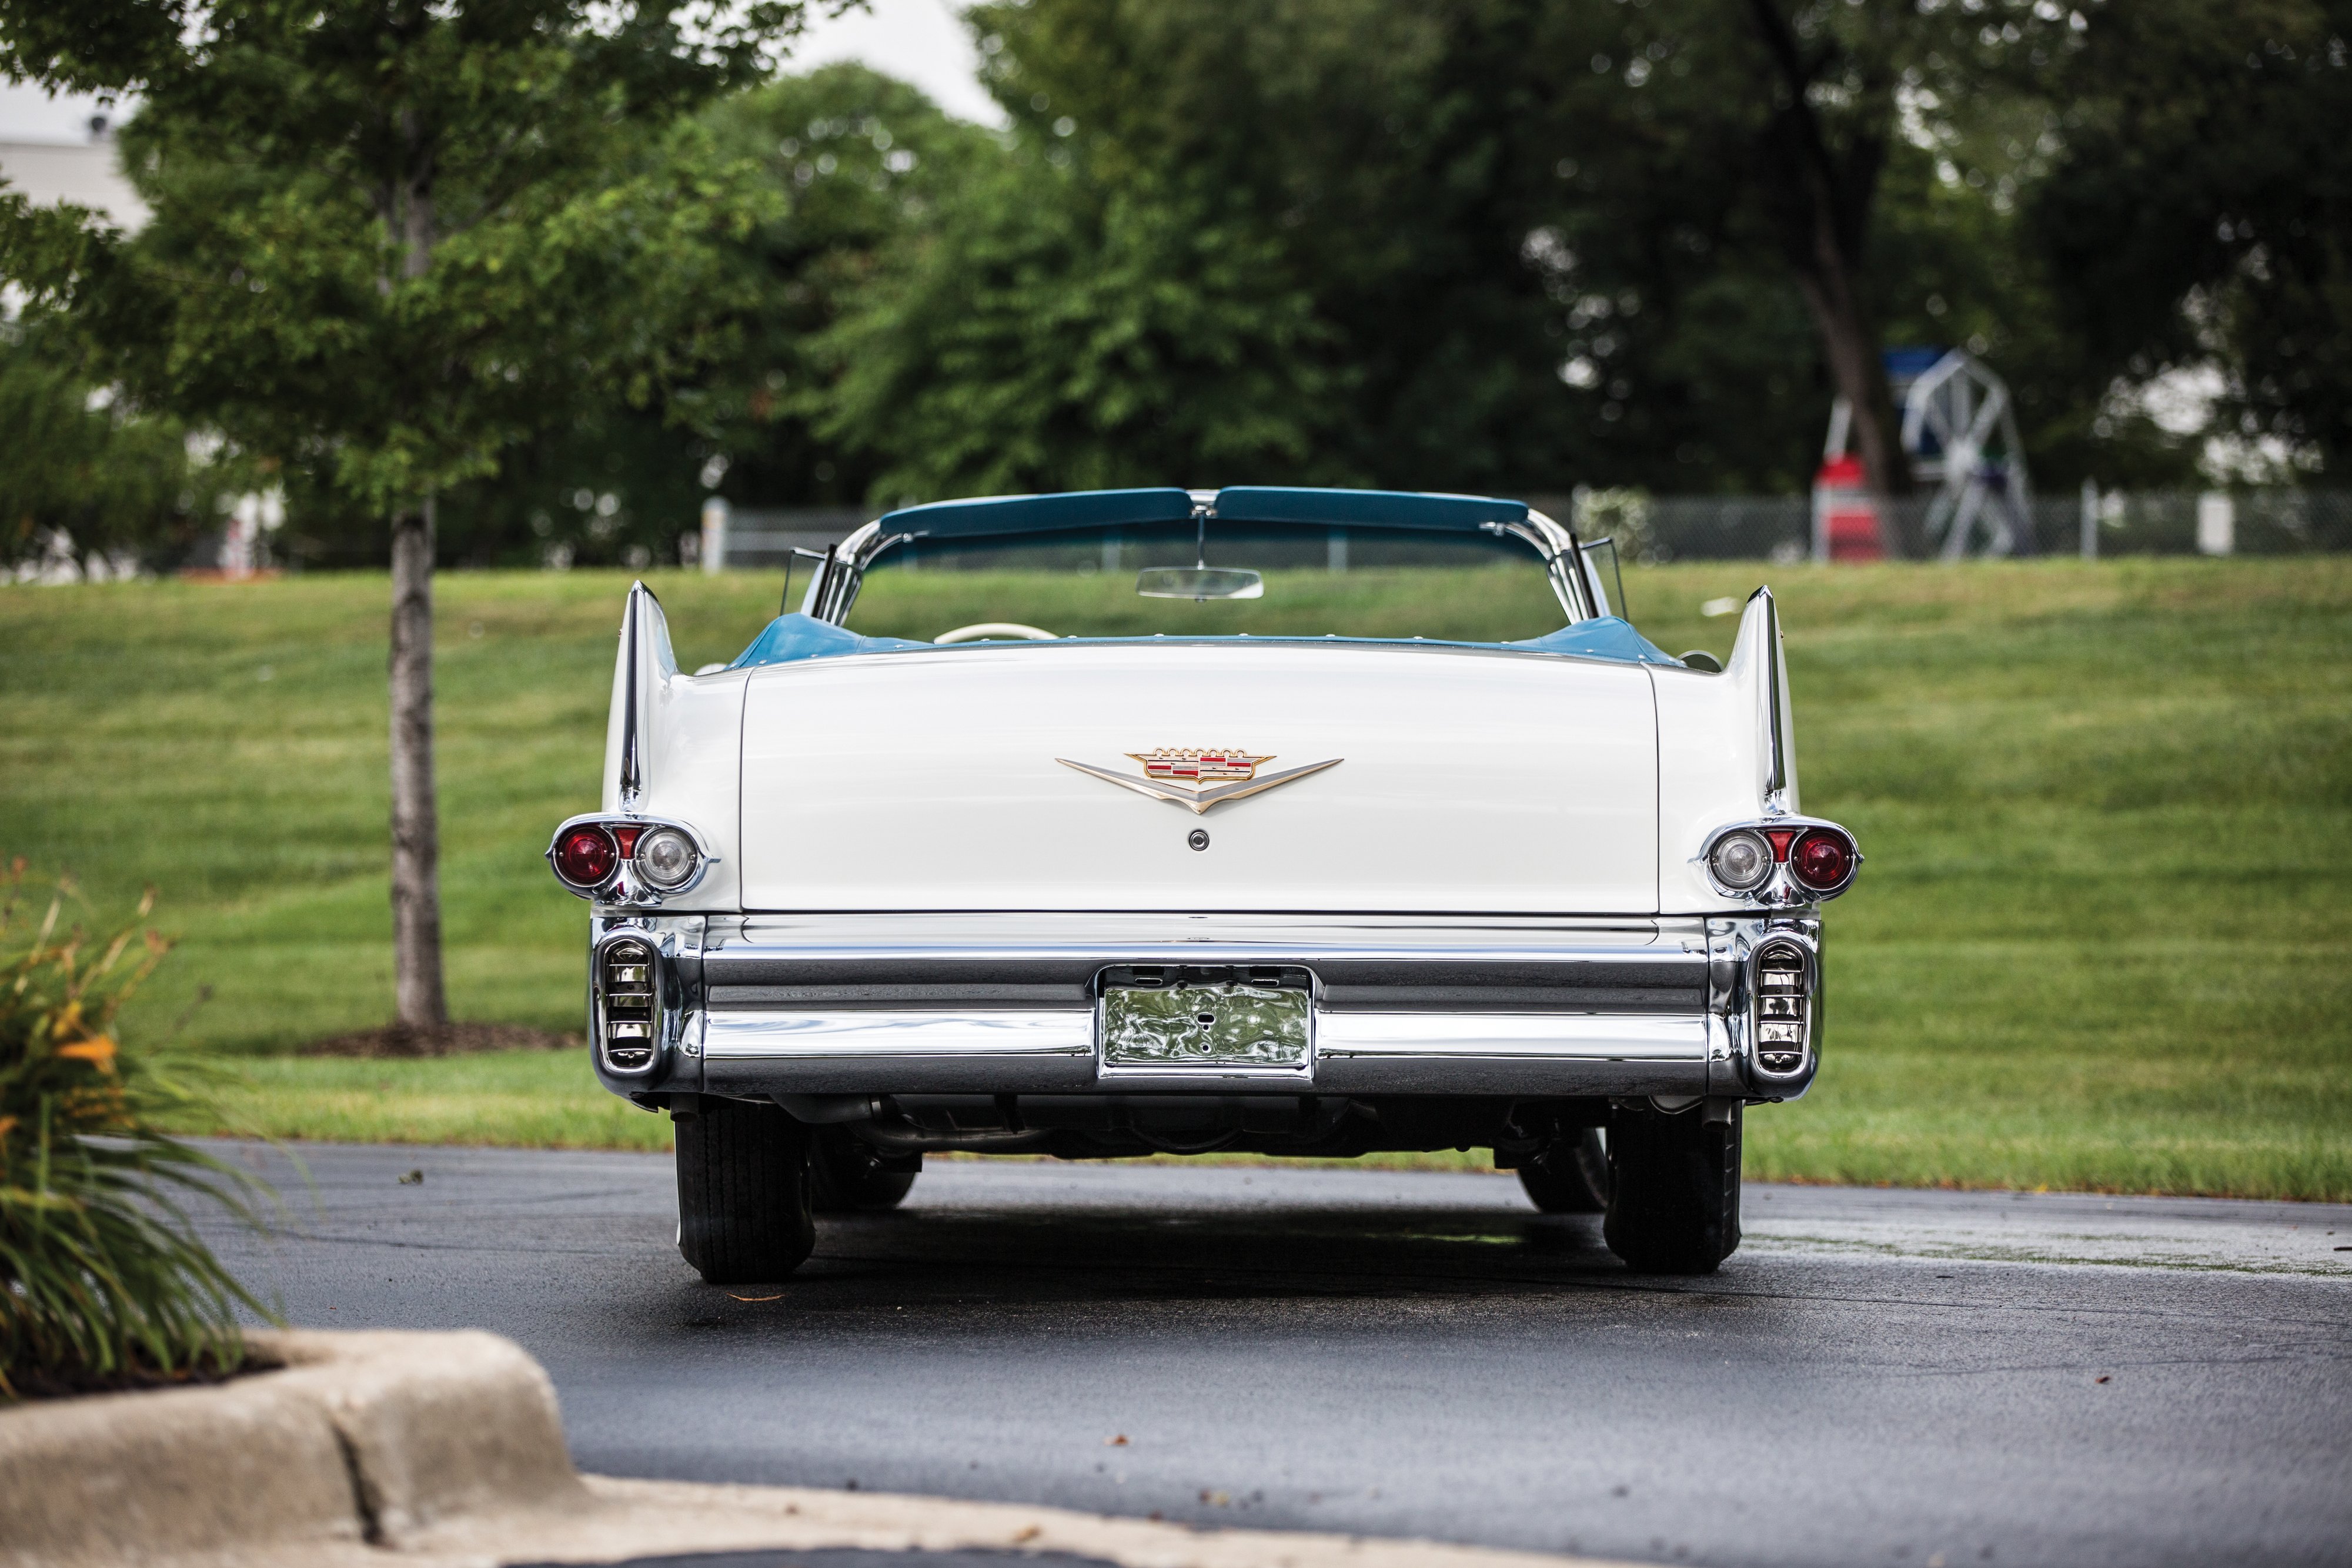 1958, Cadillac, Sixty two, Convertible, White, Cars, Classic Wallpaper